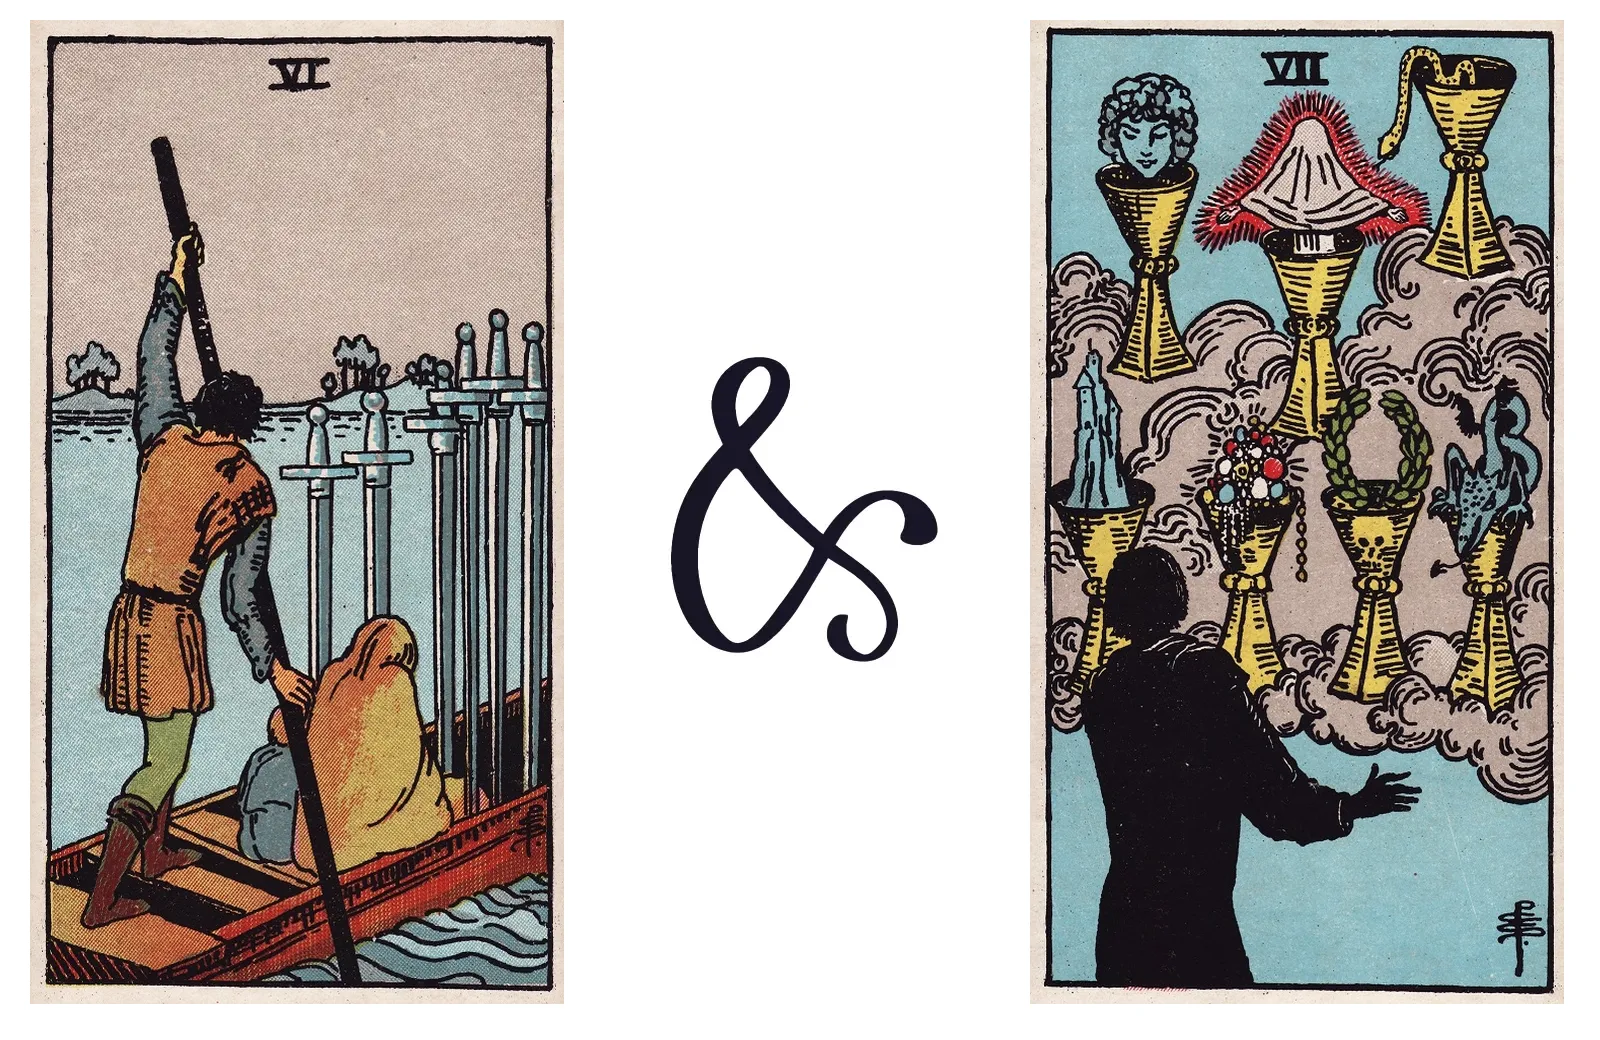 Six of Swords and Seven of Cups